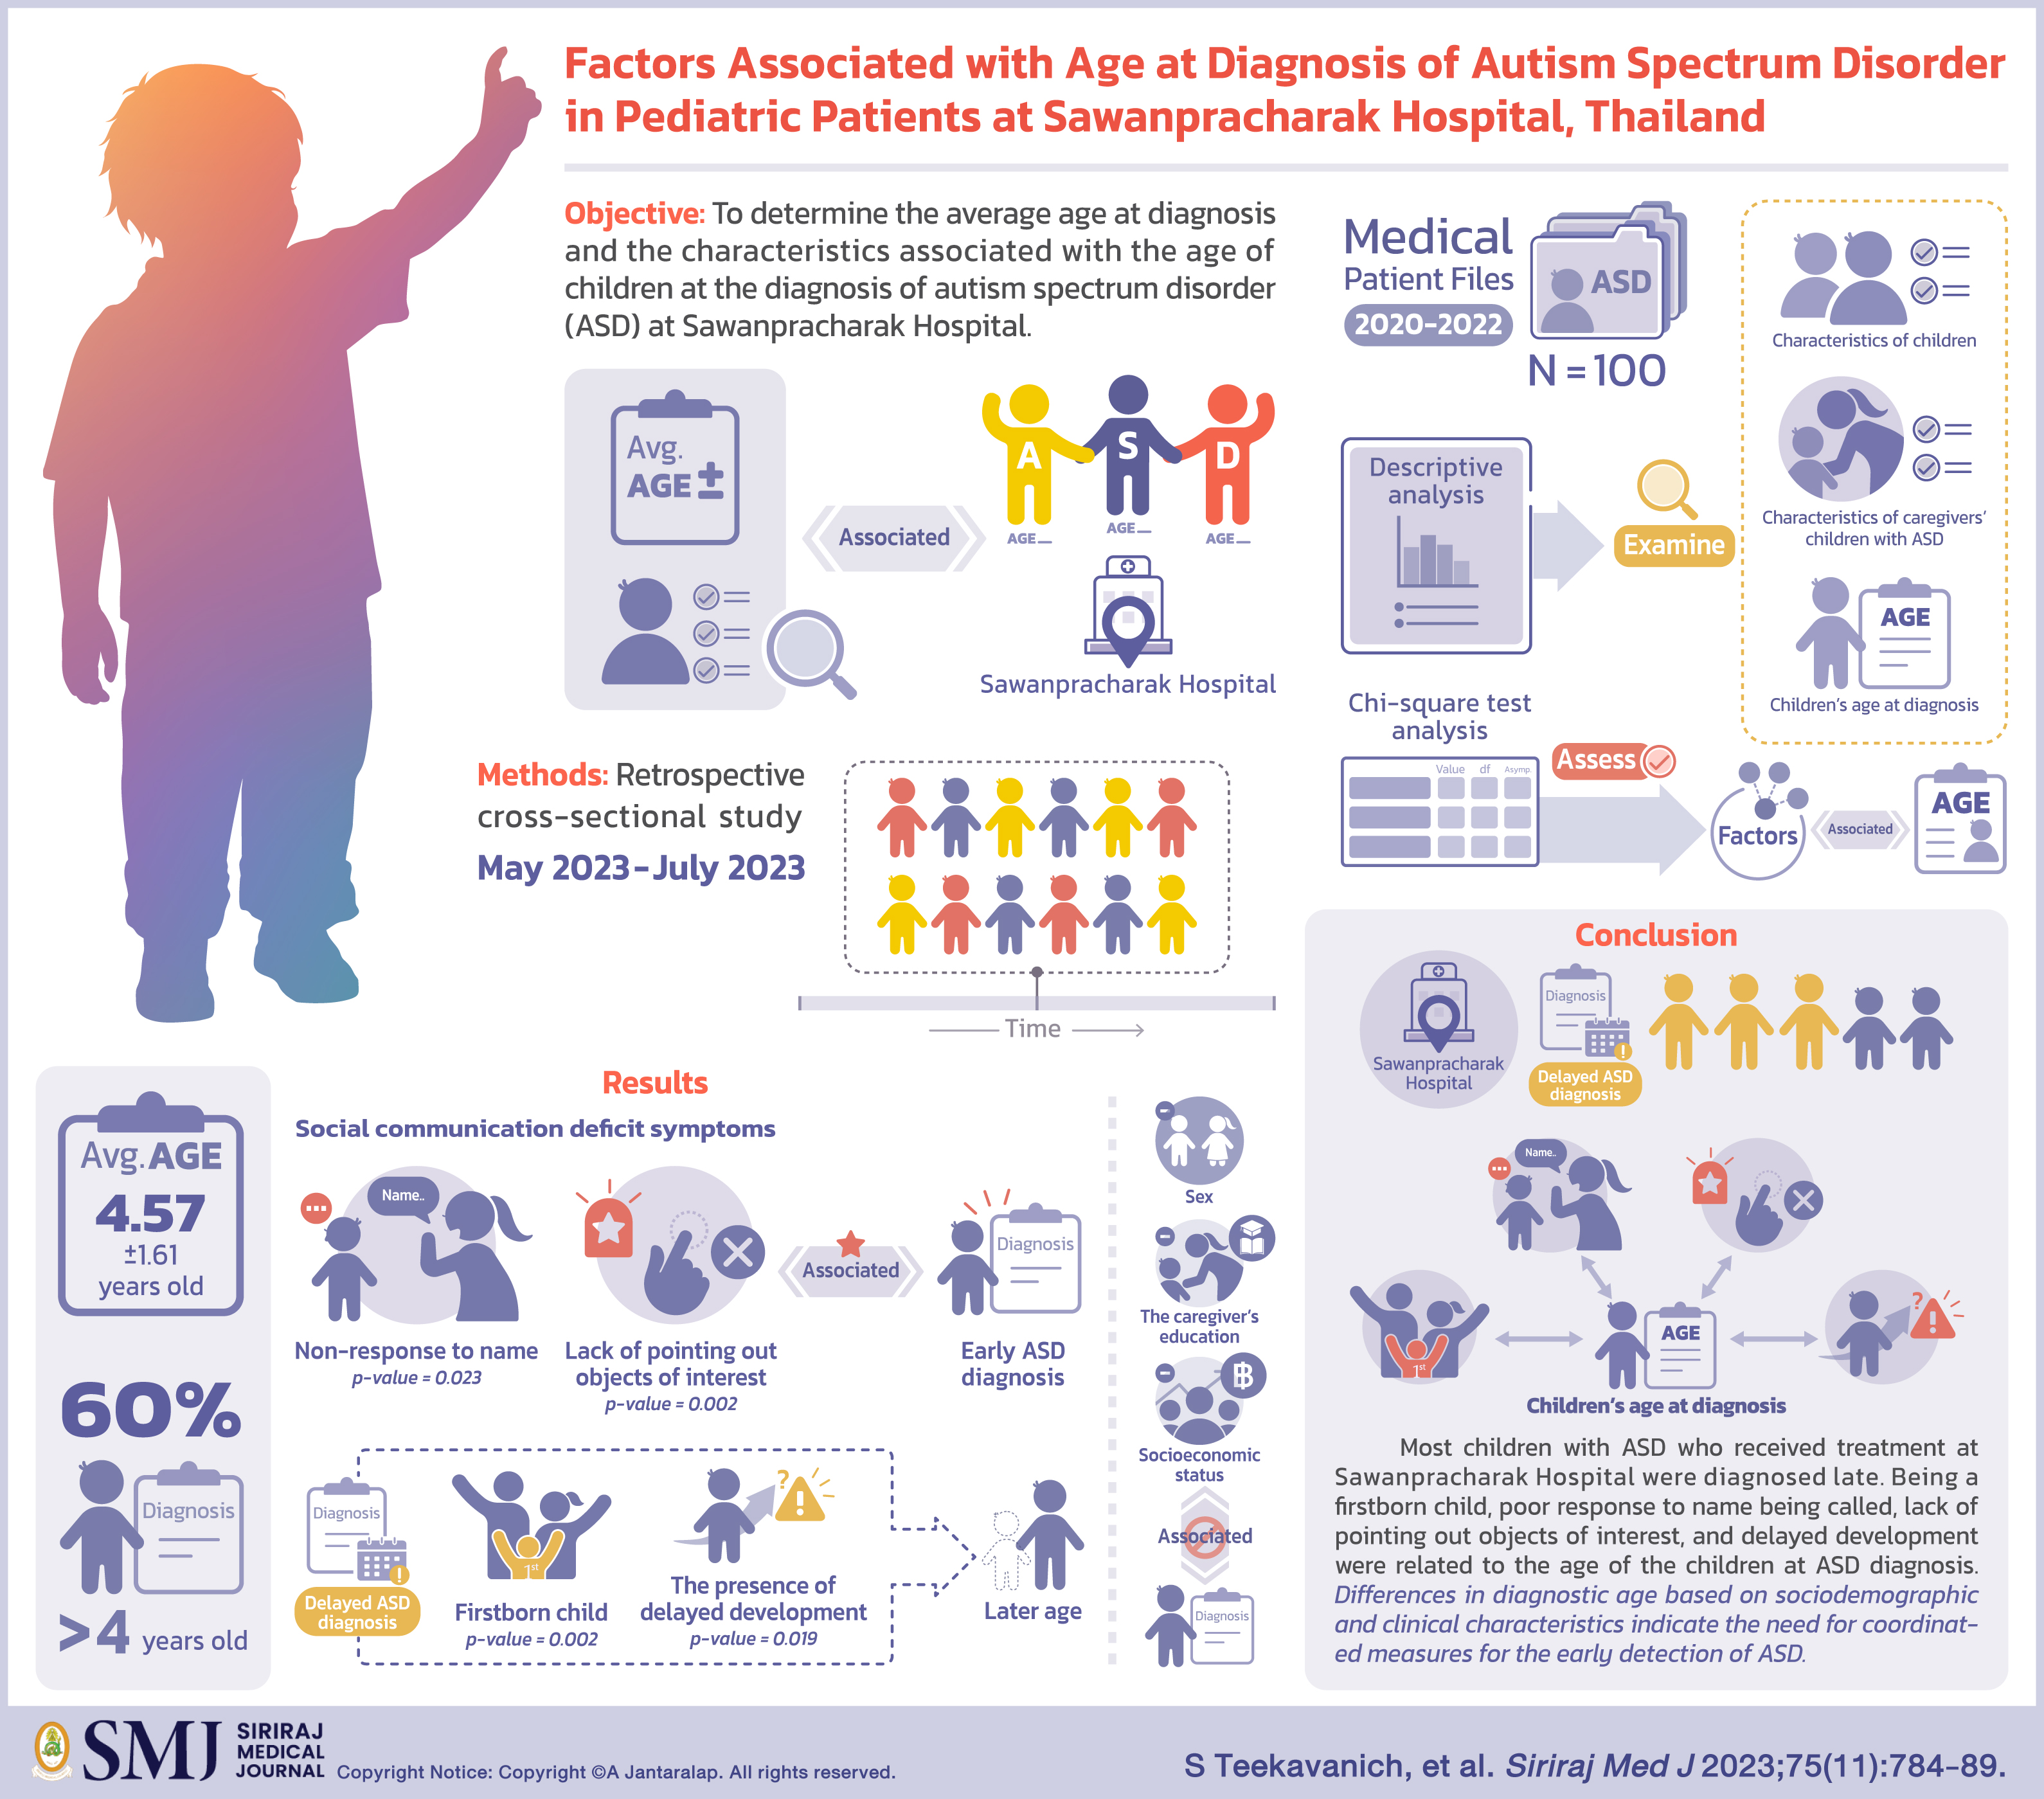 Factors Associated with Age at Diagnosis of Autism Spectrum Disorder in Pediatric Patients at Sawanpracharak Hospital, Thailand